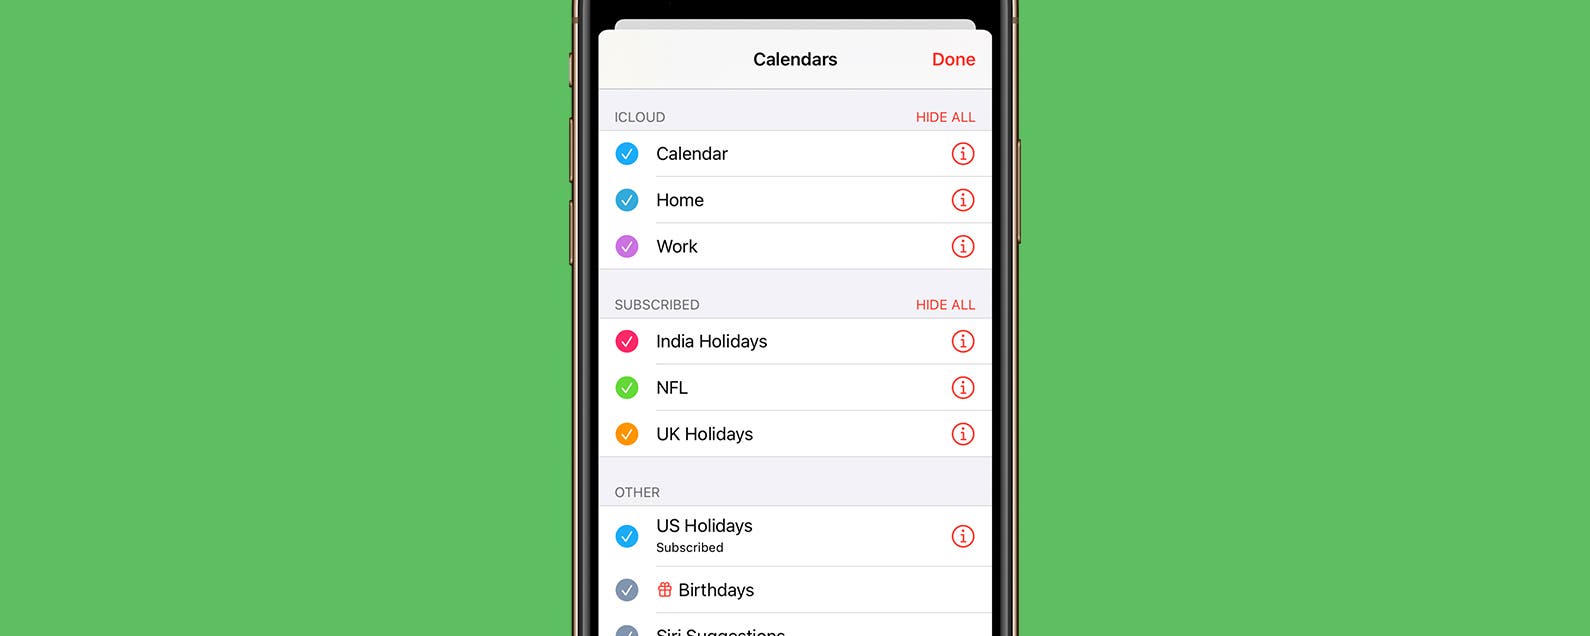 How to Add, Delete & Sync Calendar Subscriptions